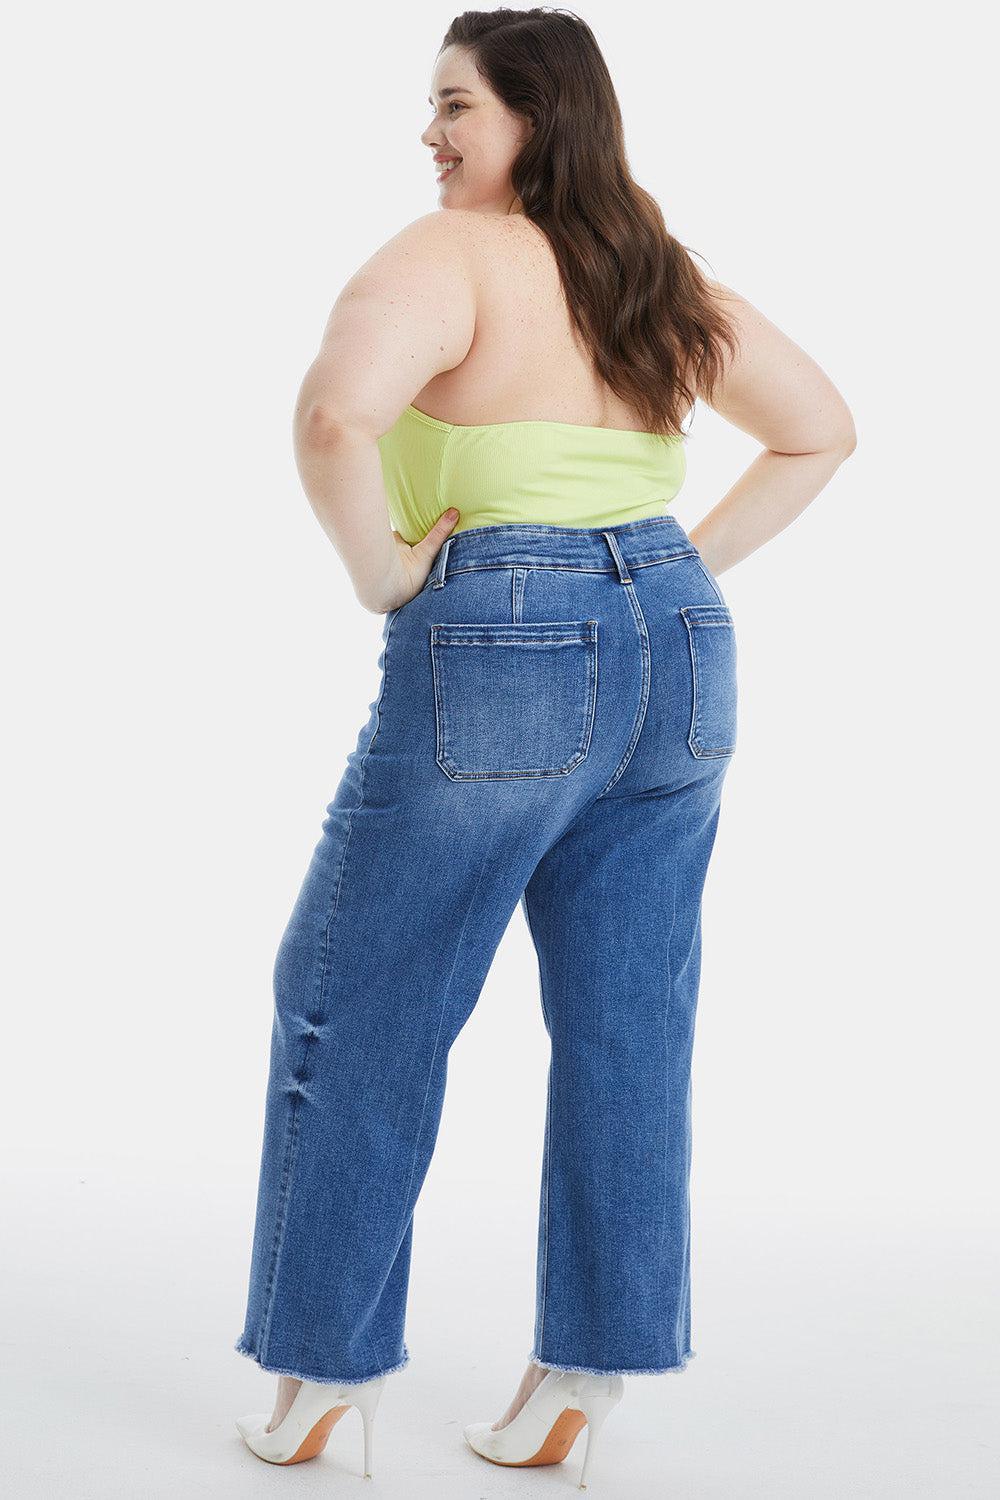 a woman wearing high rise jeans and a yellow tank top